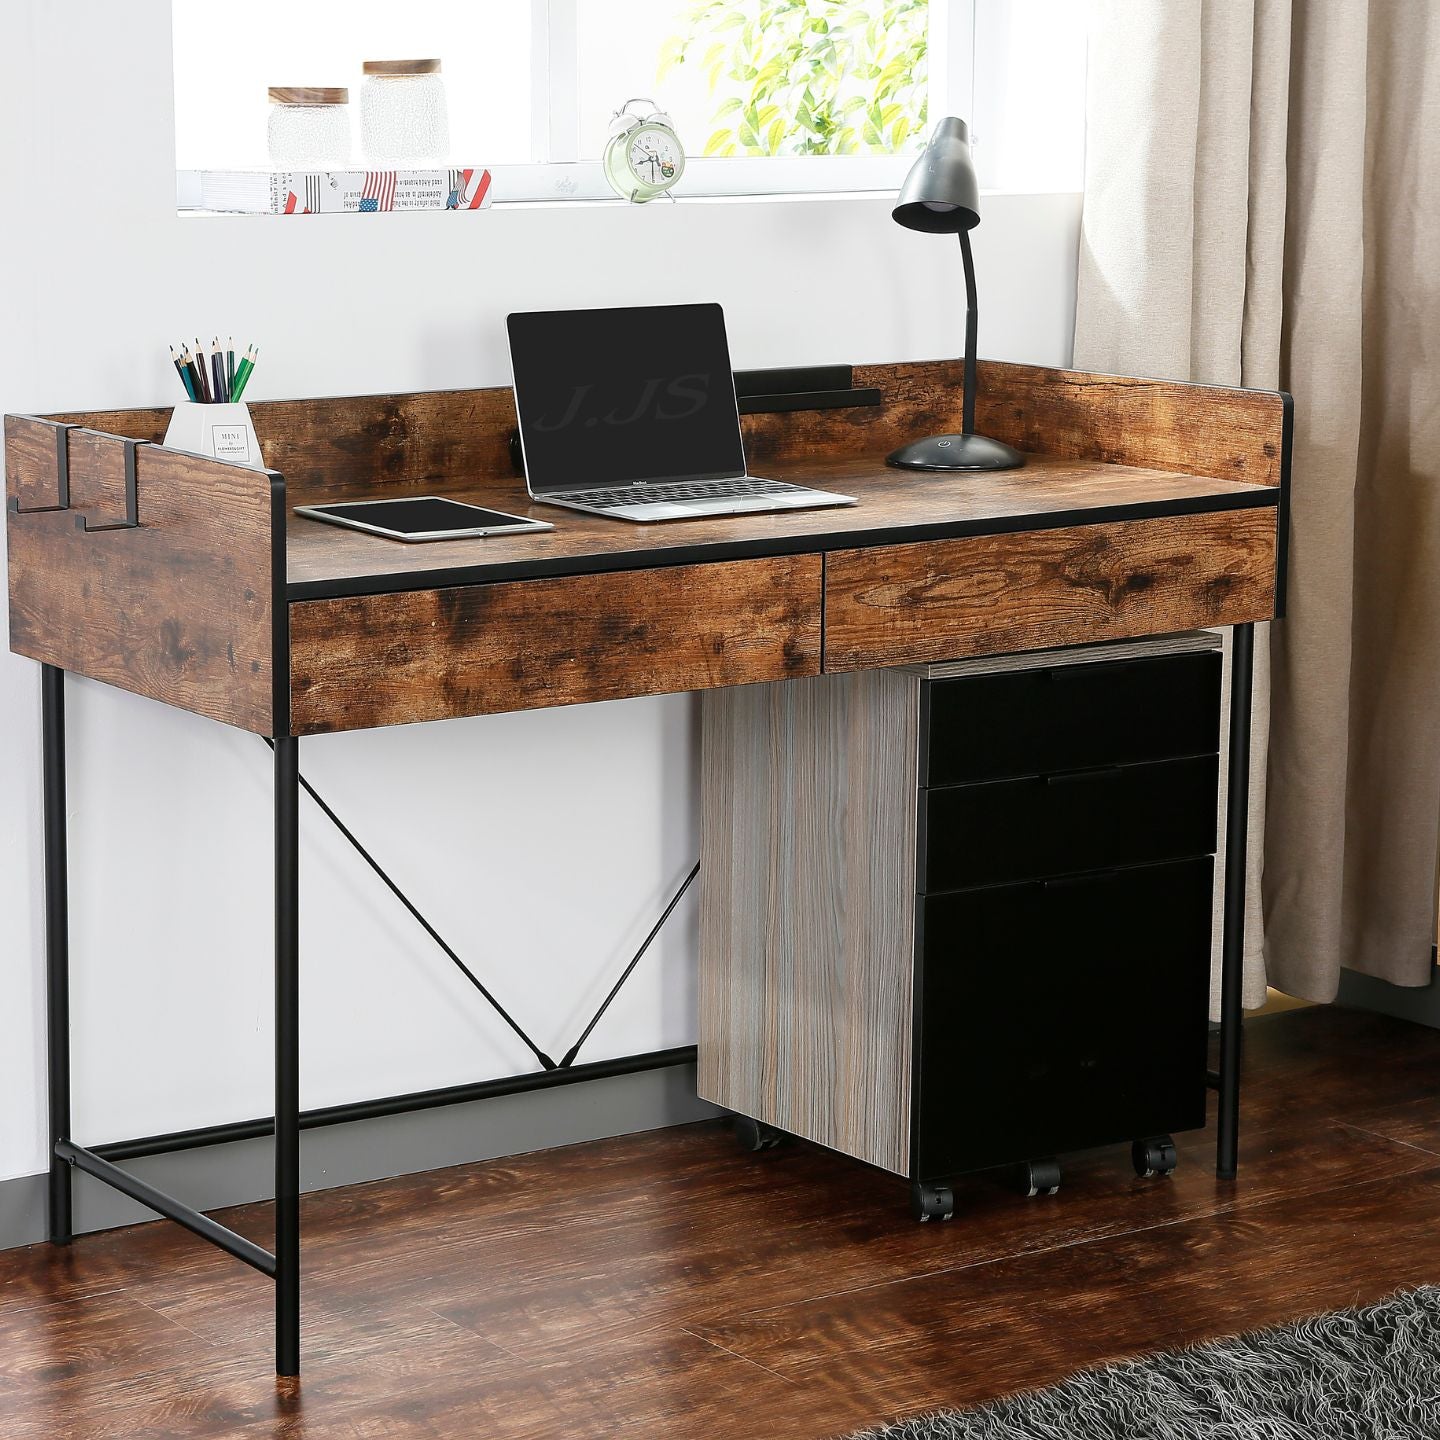 Multi Function Filing and Stationery Cabinet Fitting Underneath Desk